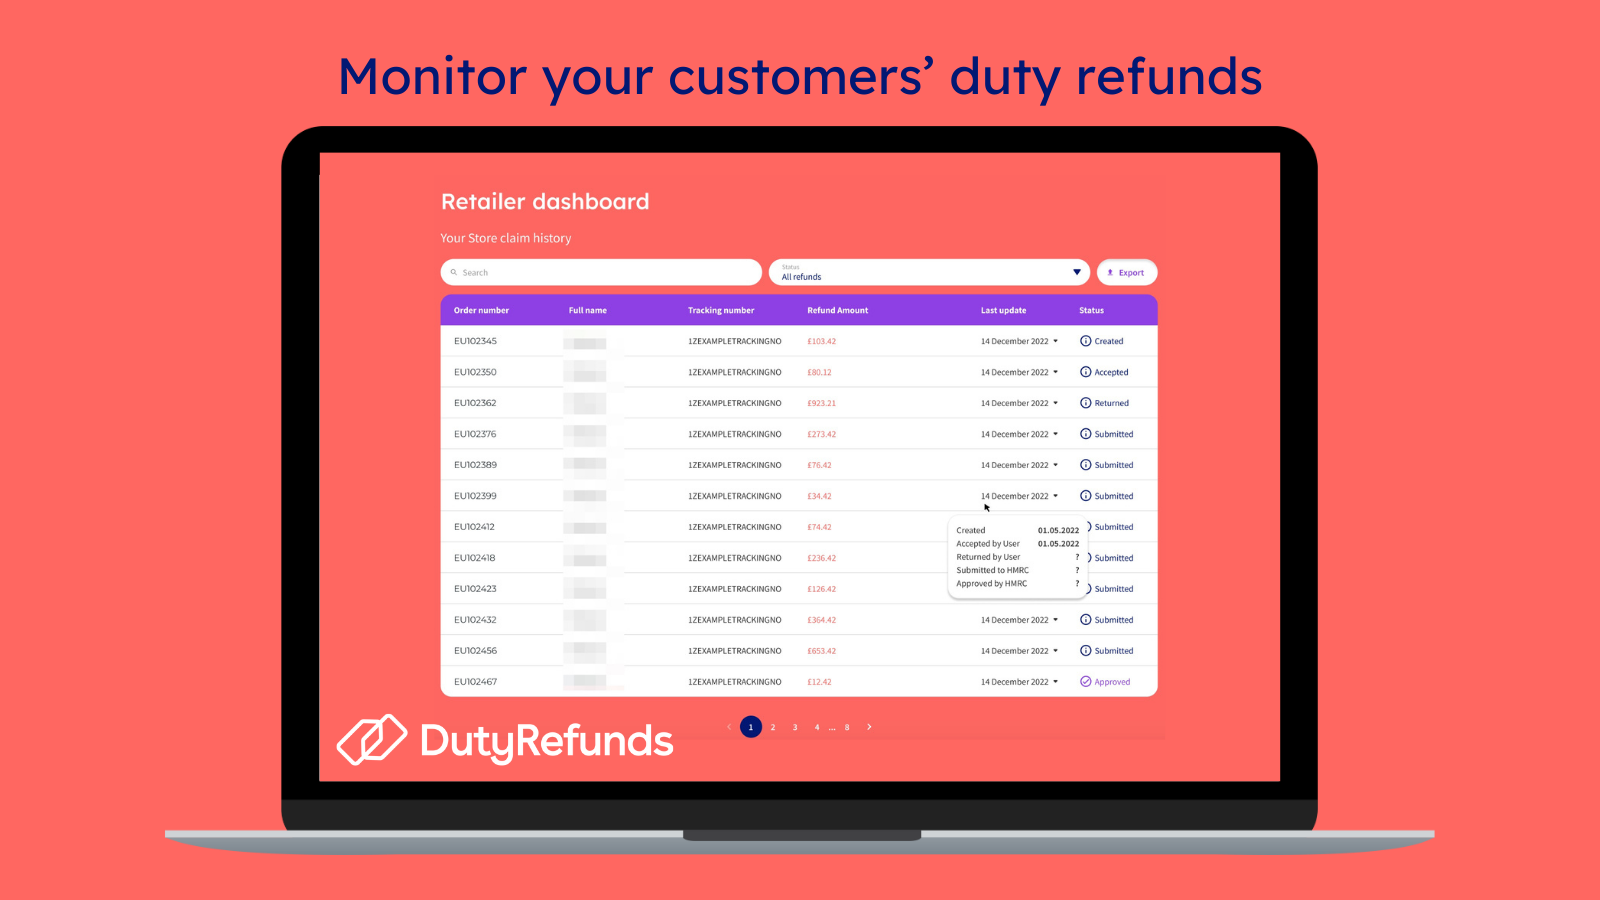 Monitor your customers' duty refunds